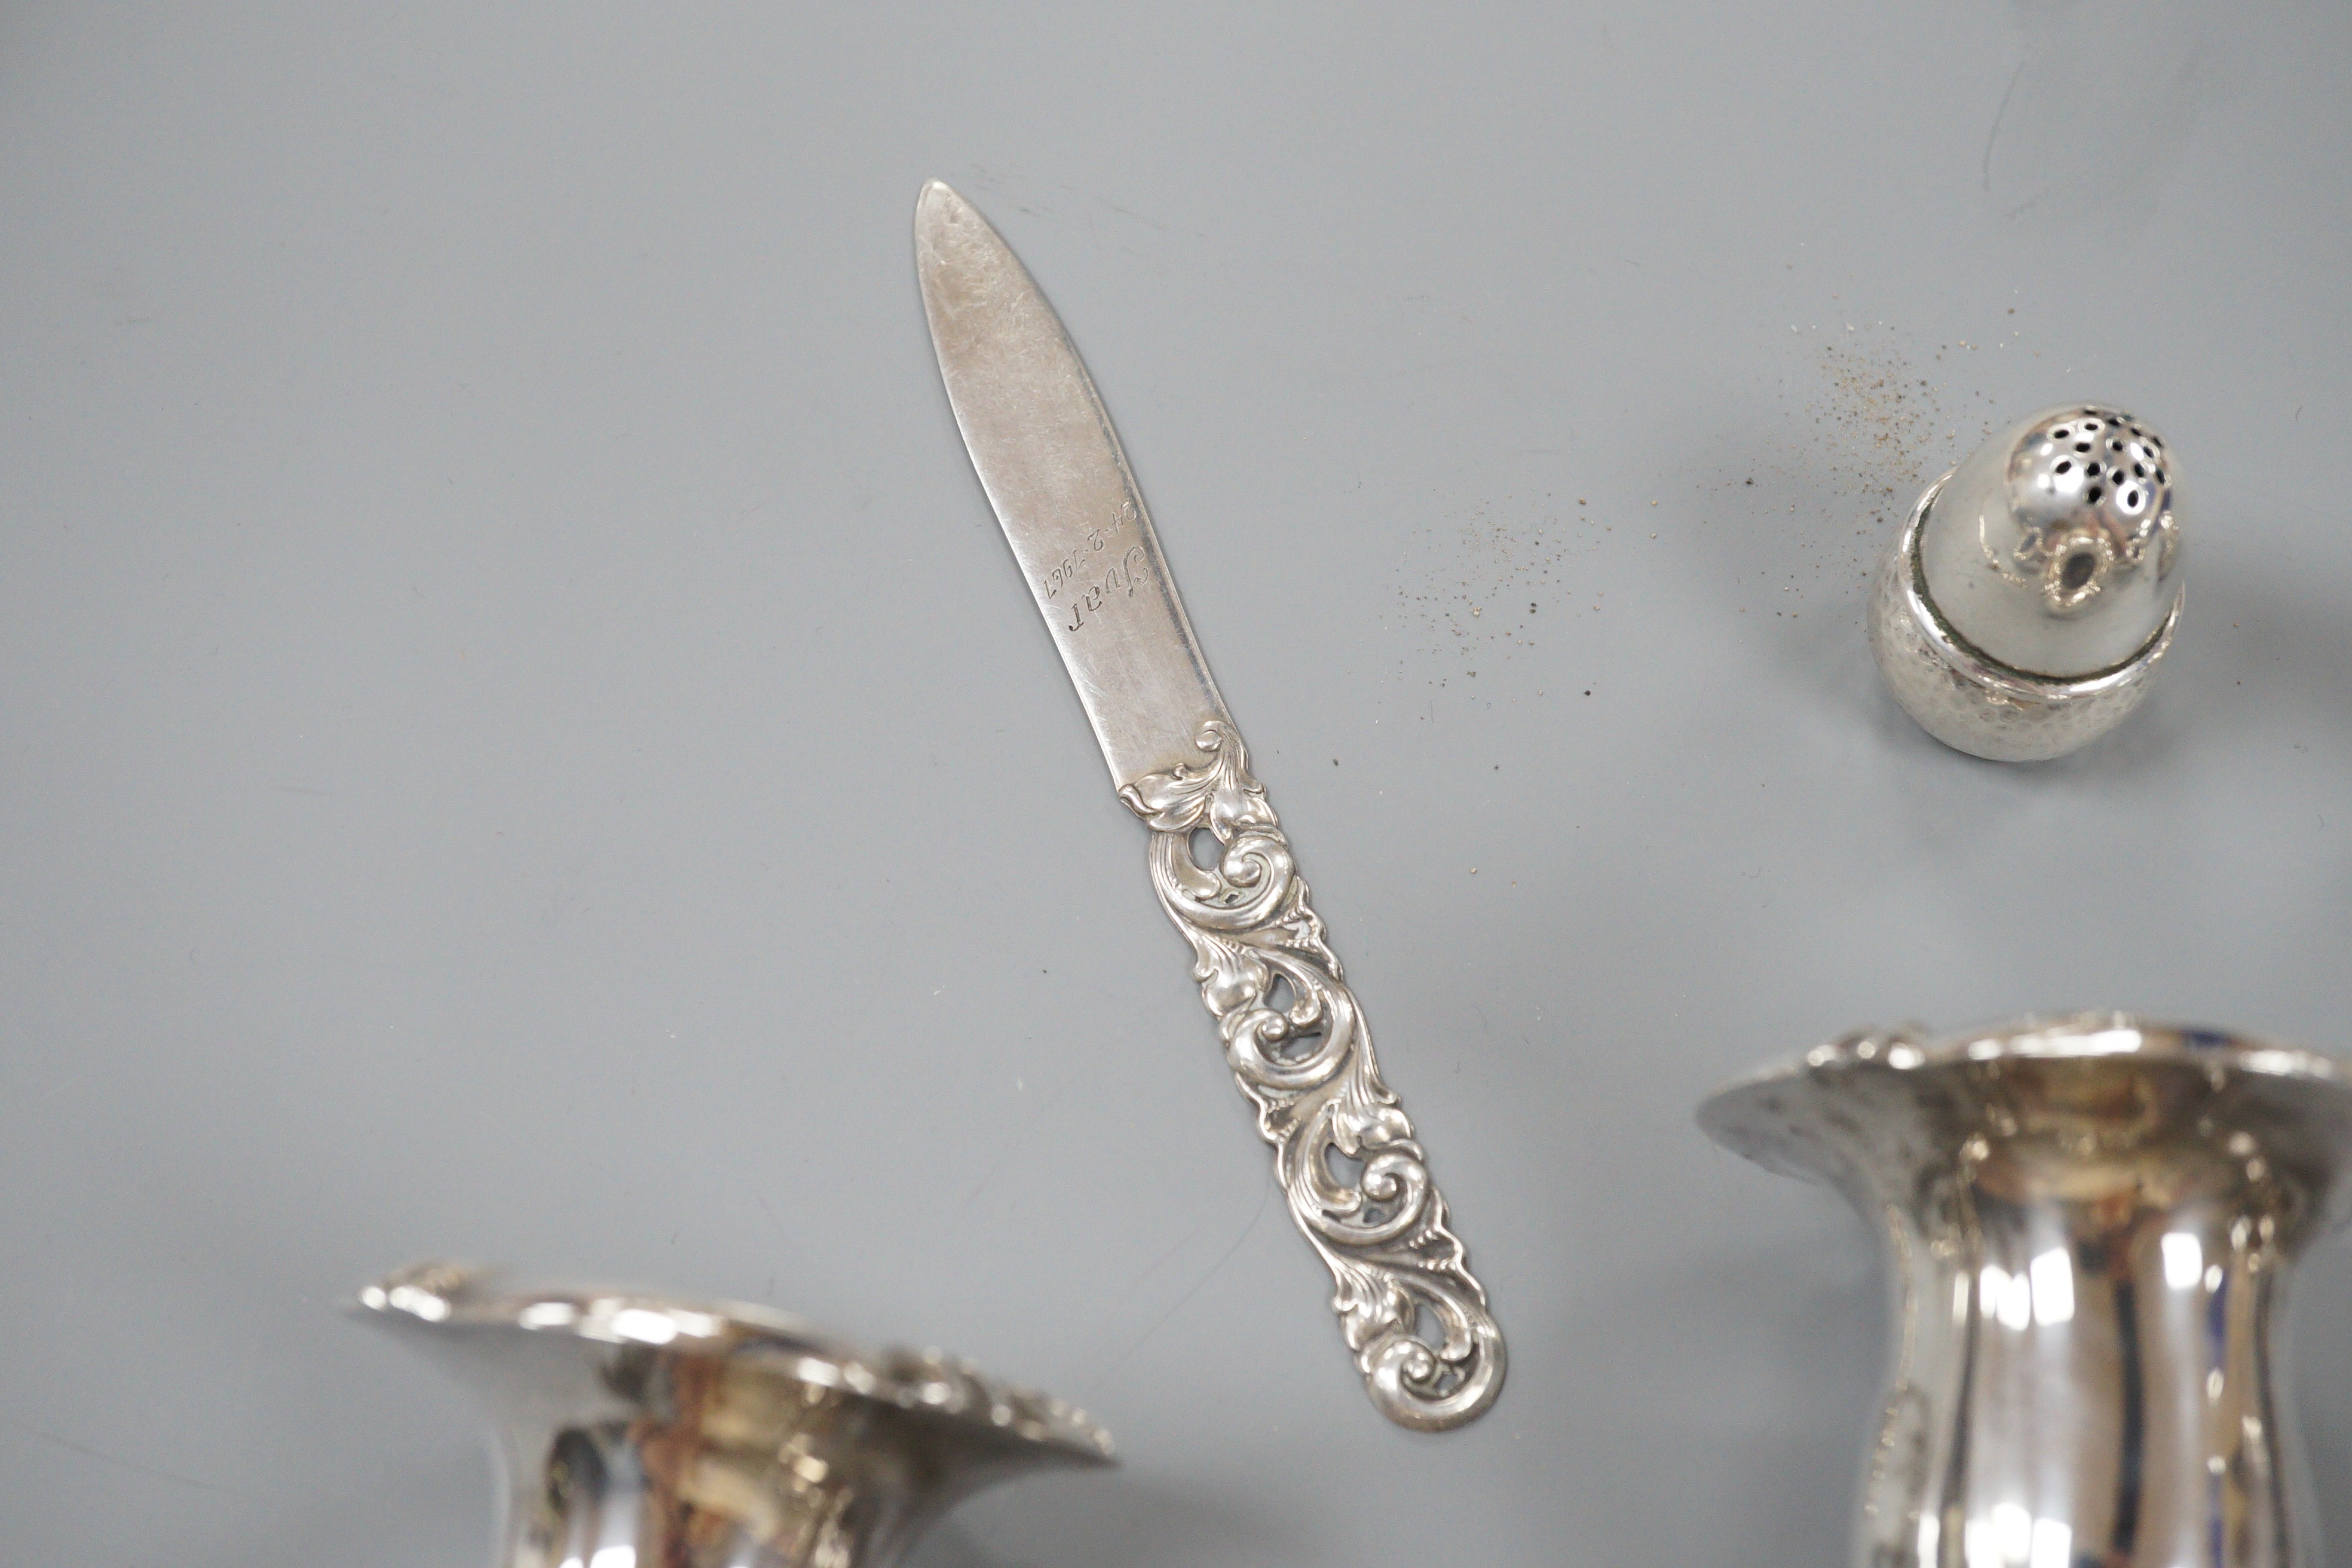 A 20th century Danish 830 standard white metal candelabrum, height 25.6cm, weighted, a pair of Danish white metal acorn condiments and a Danish white metal paper knife.